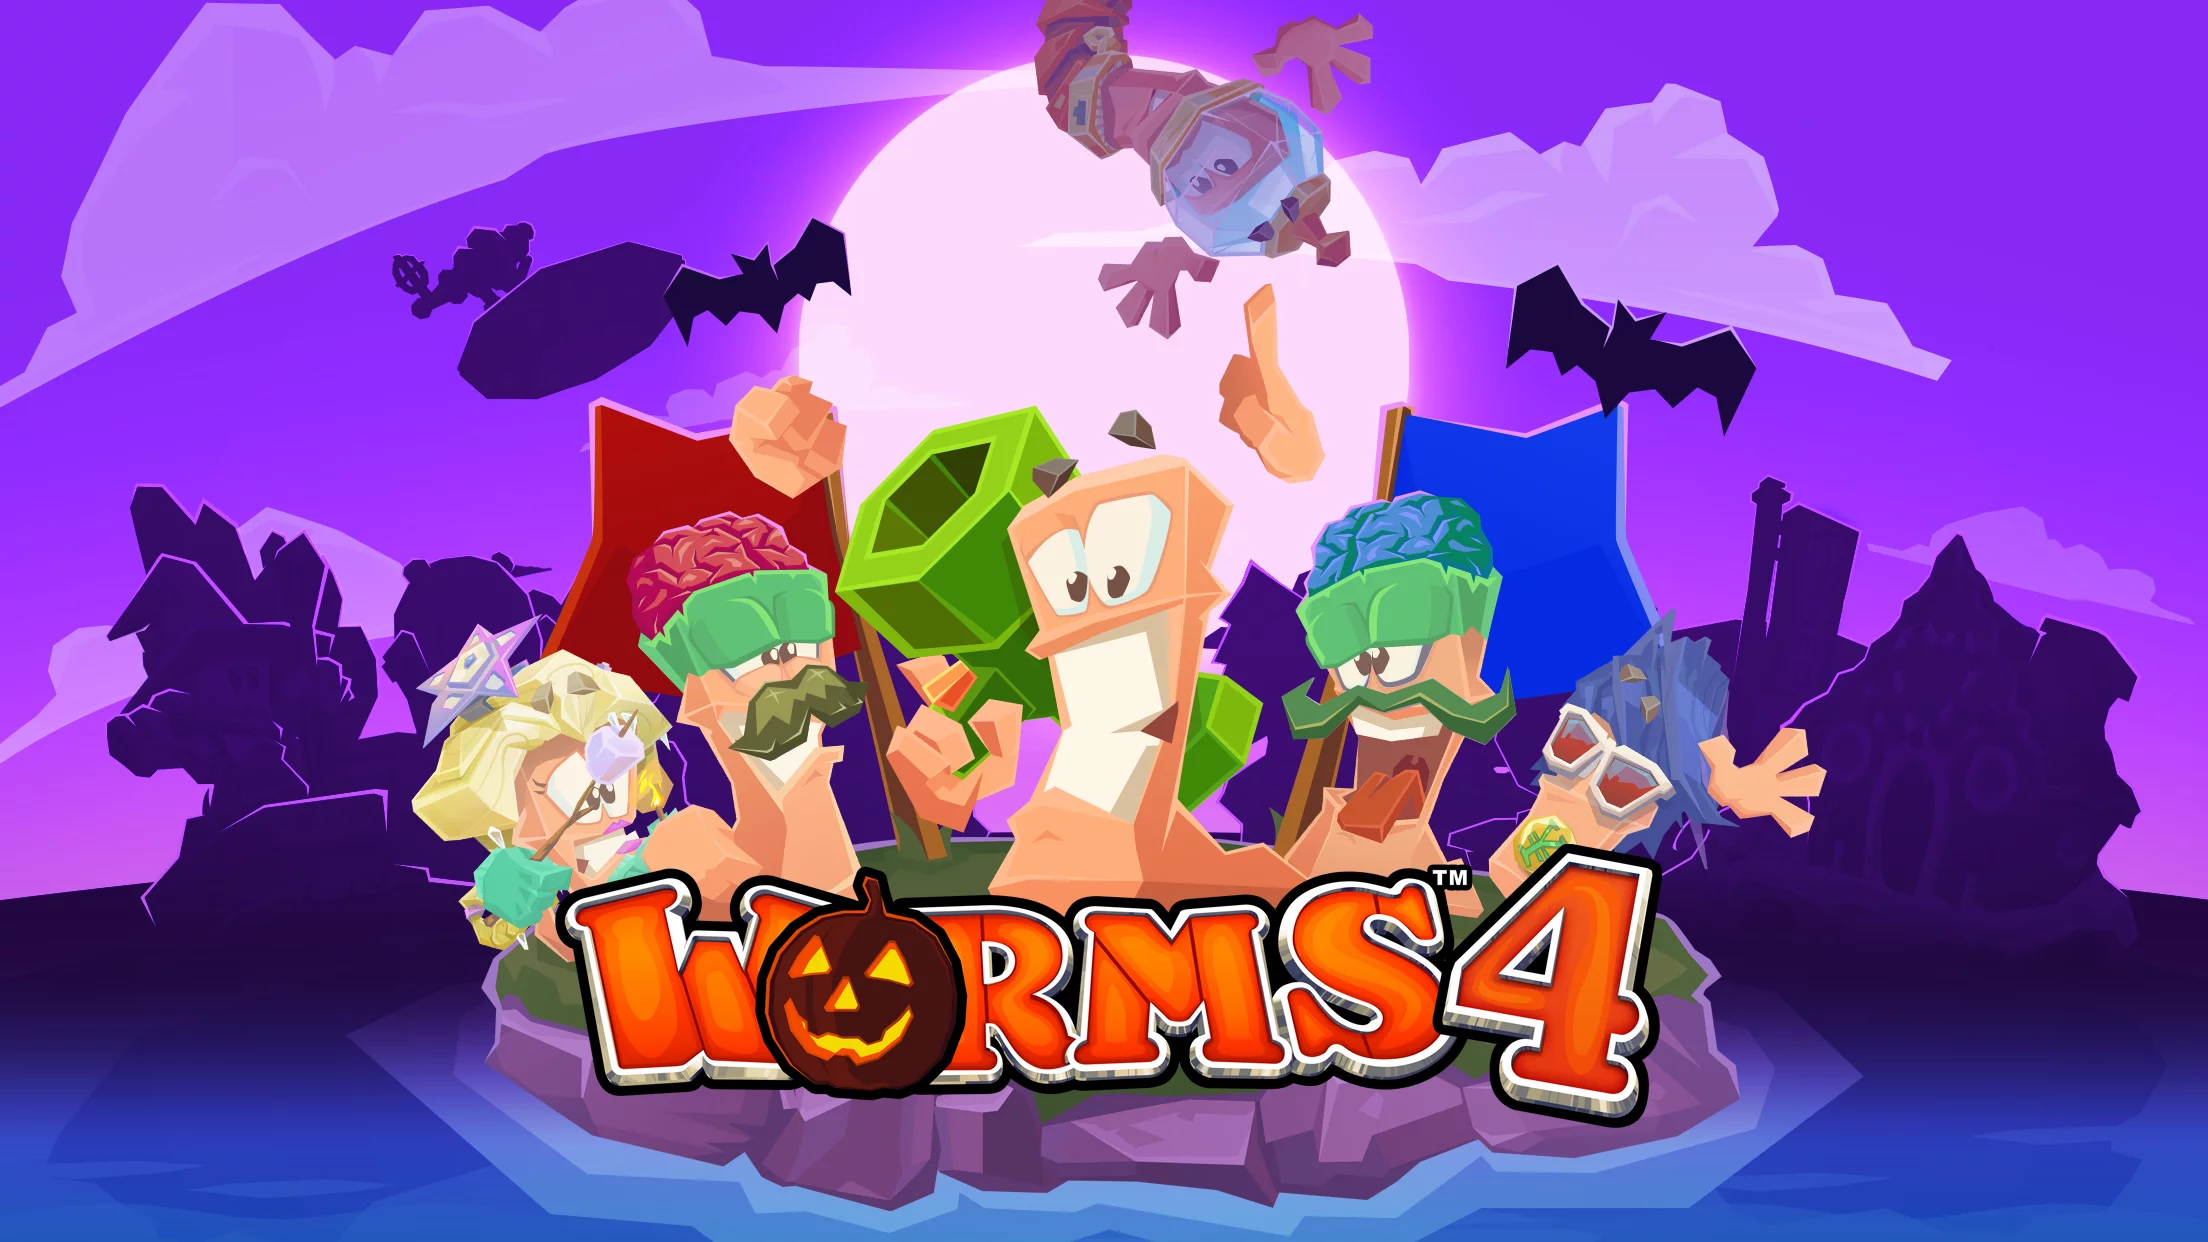 Download Worms 4 Game Full Version